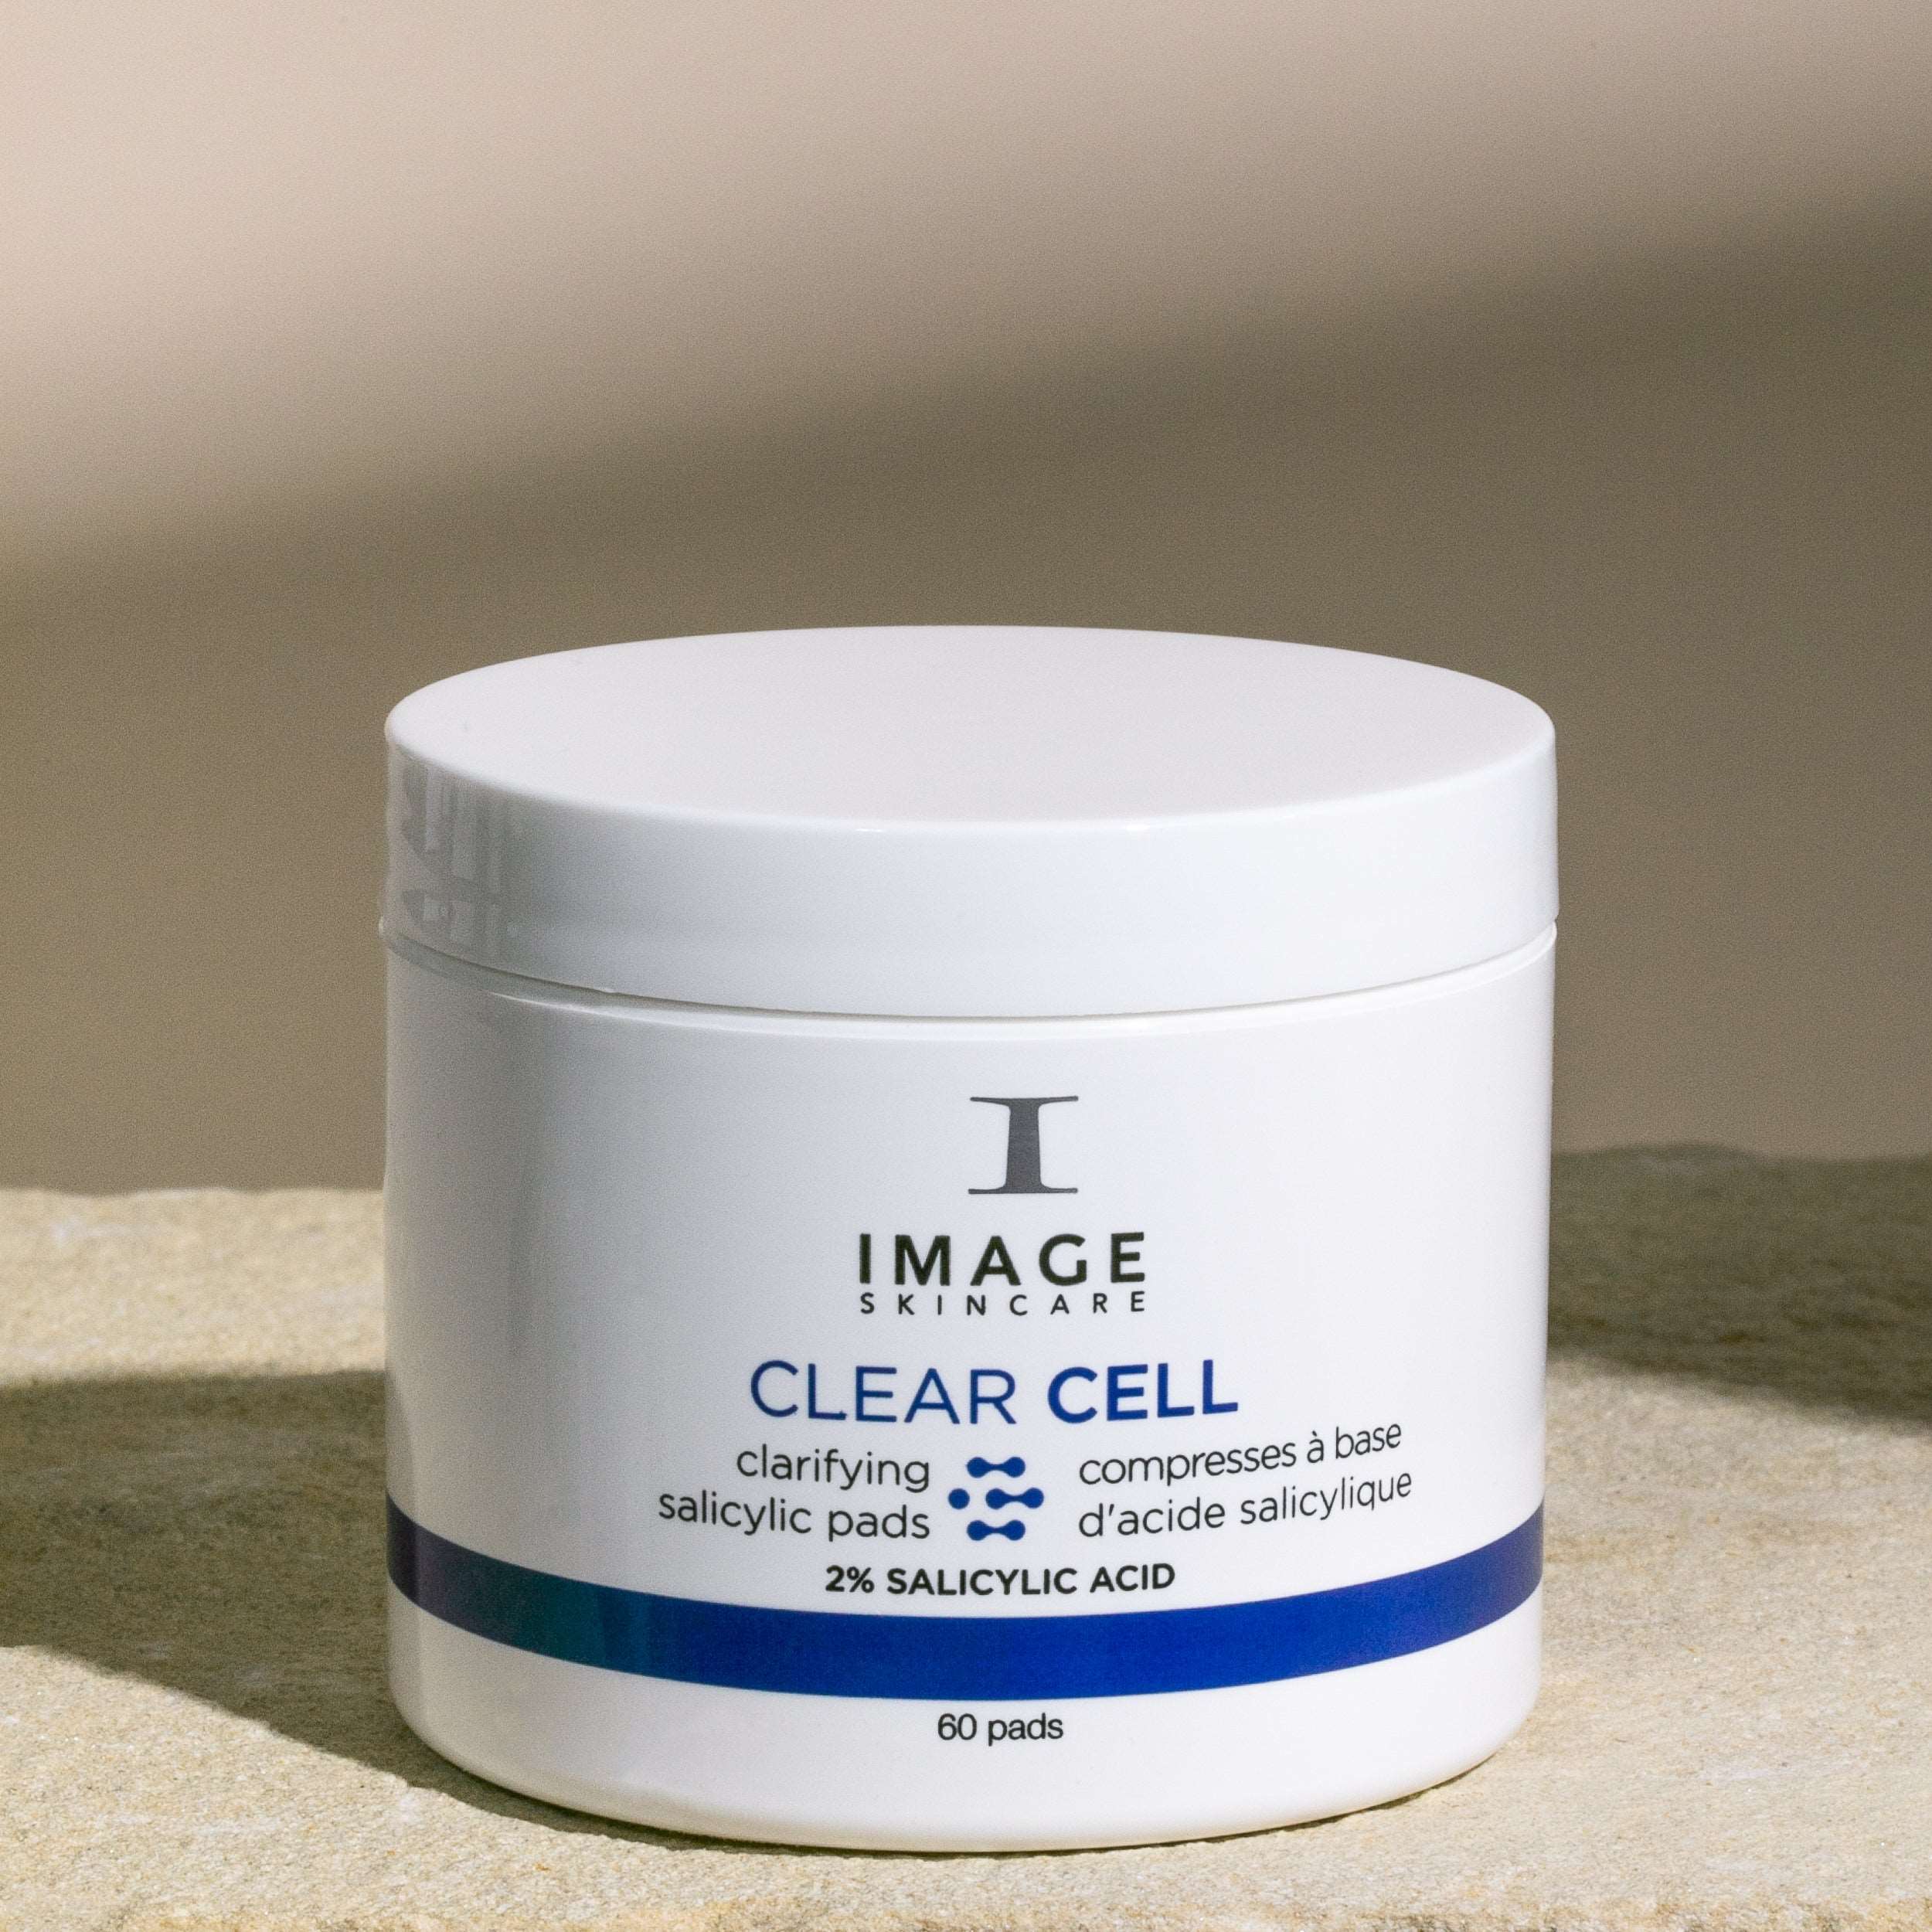 CLEAR CELL Salicylic Clarifying Pads Image Skincare